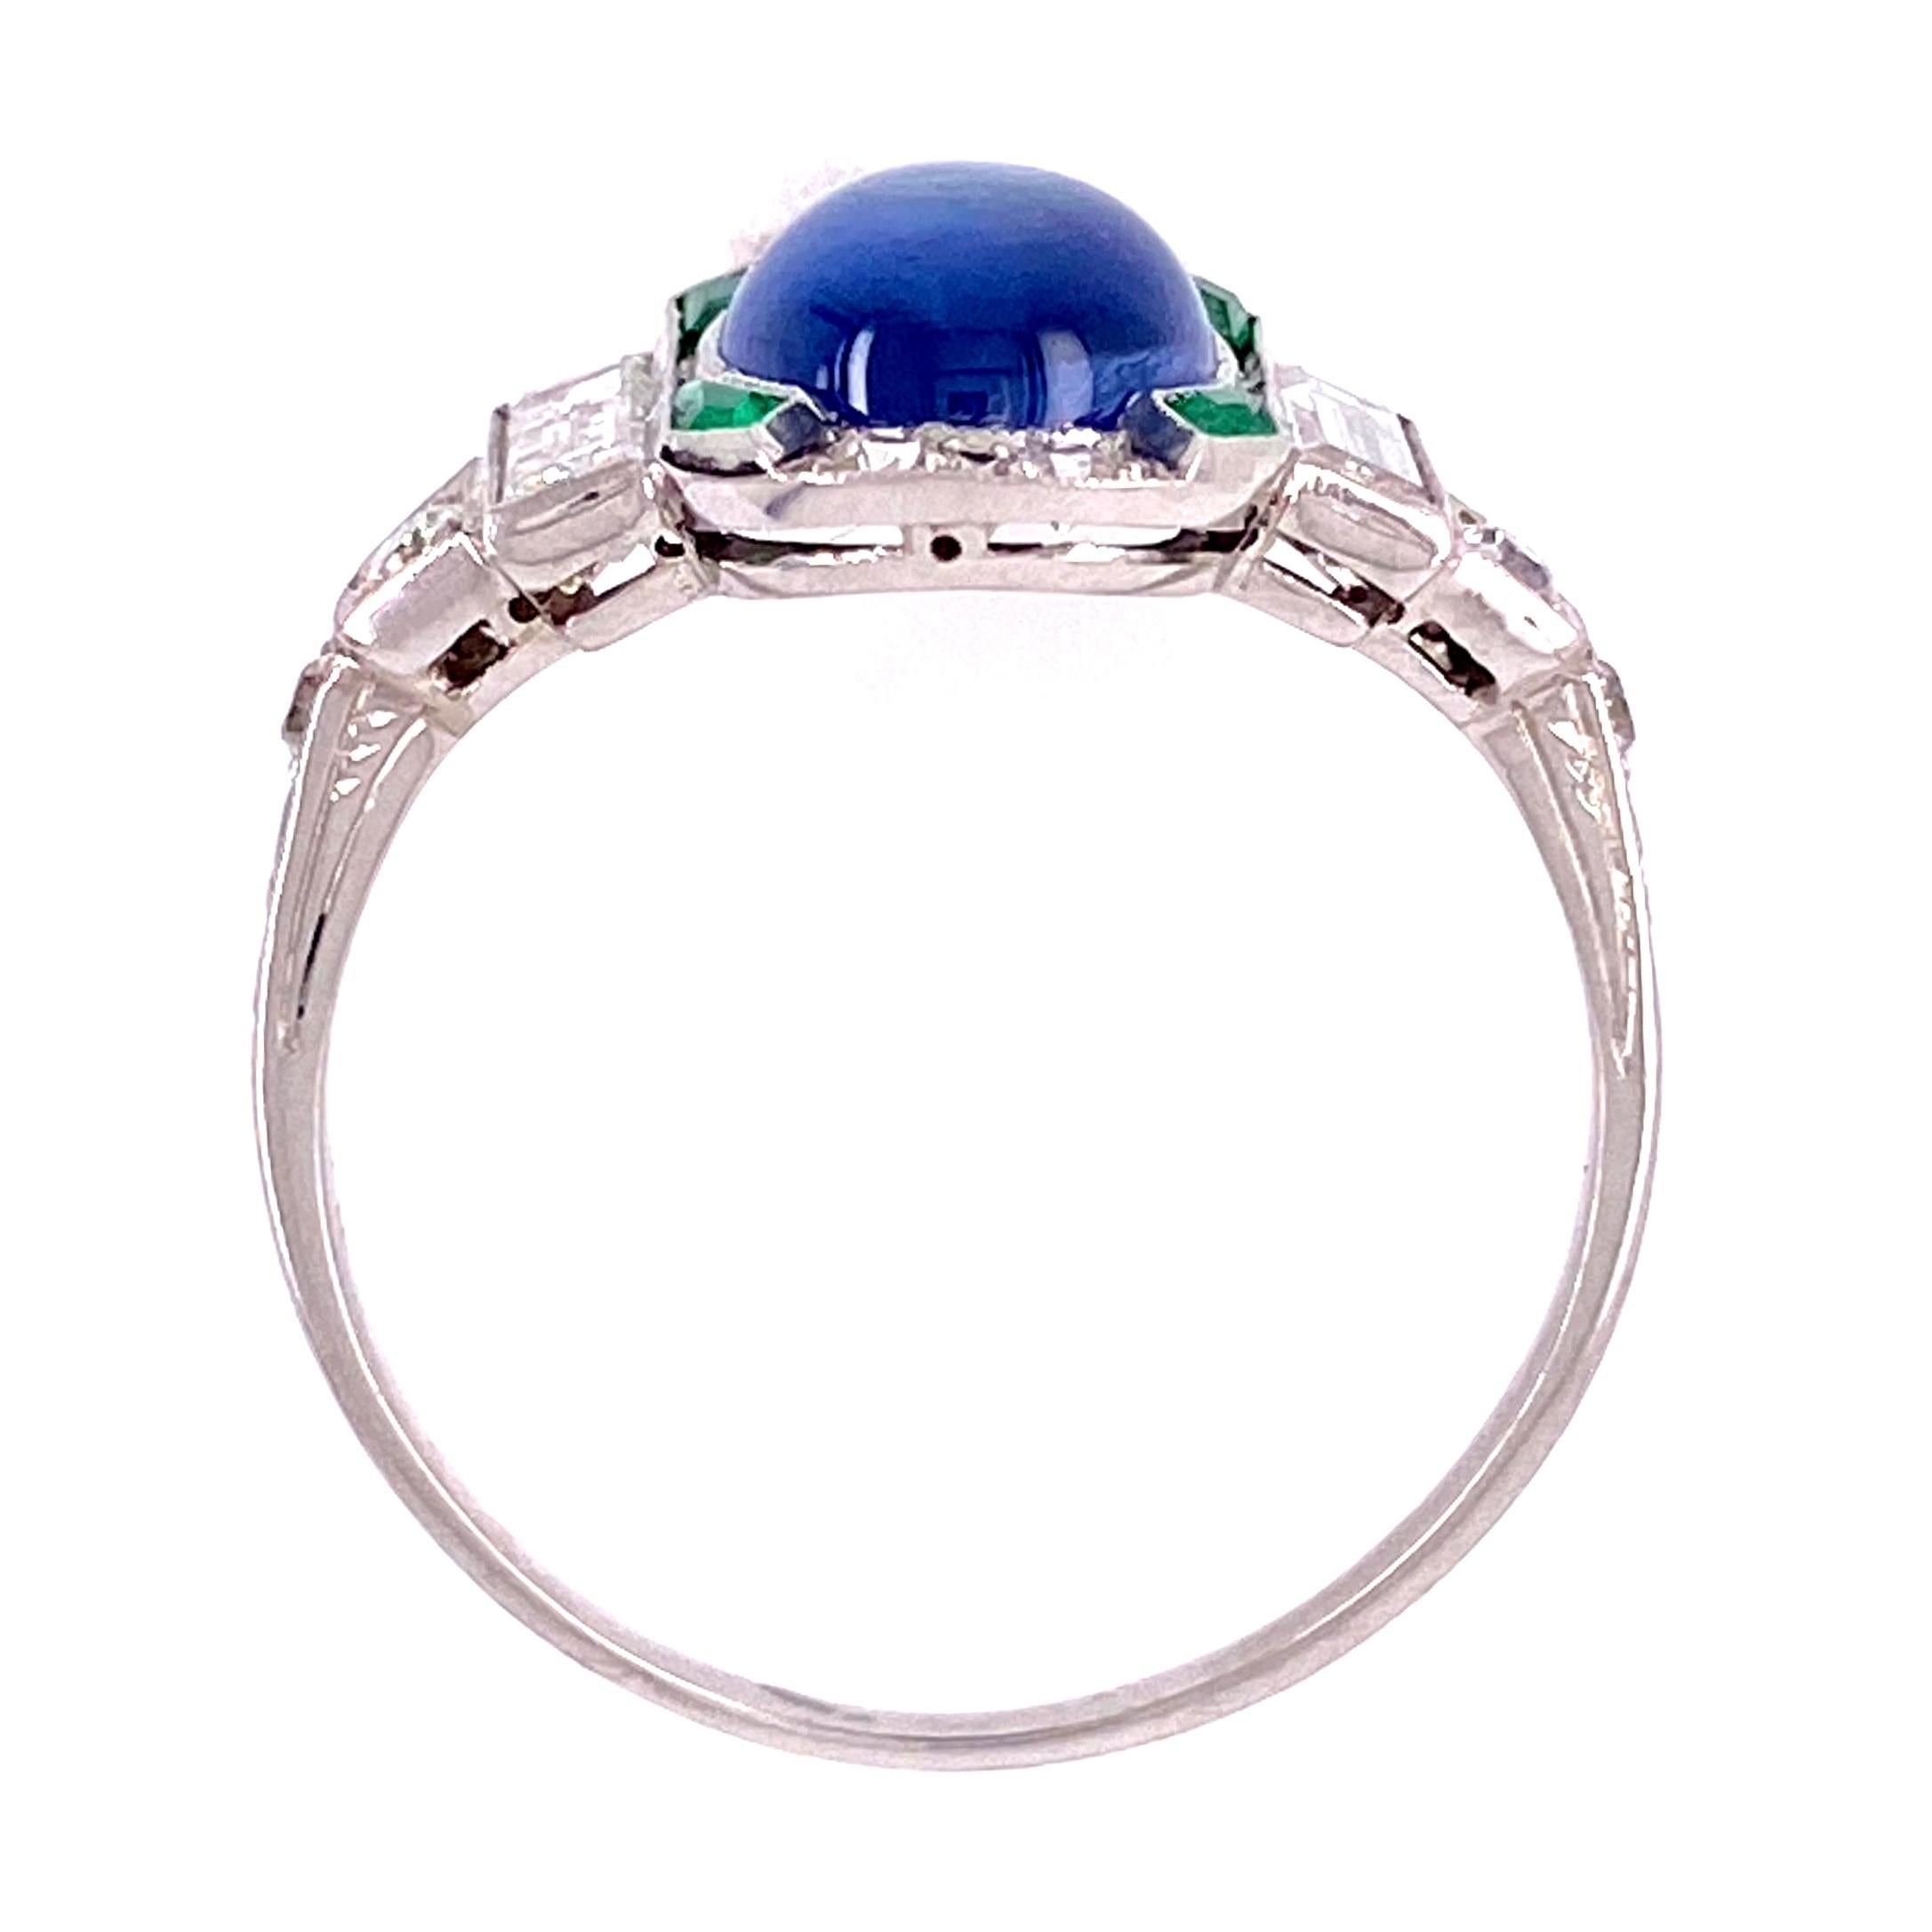 Beautiful and finely detailed Sapphire, Emerald and Diamond Cocktail Ring, center securely set with a cabochon Blue Sapphire weighing approx. 1.45 Carat accented by 4 custom cut Emeralds, weighing approx. 0.09 carats and baguette and round Diamonds